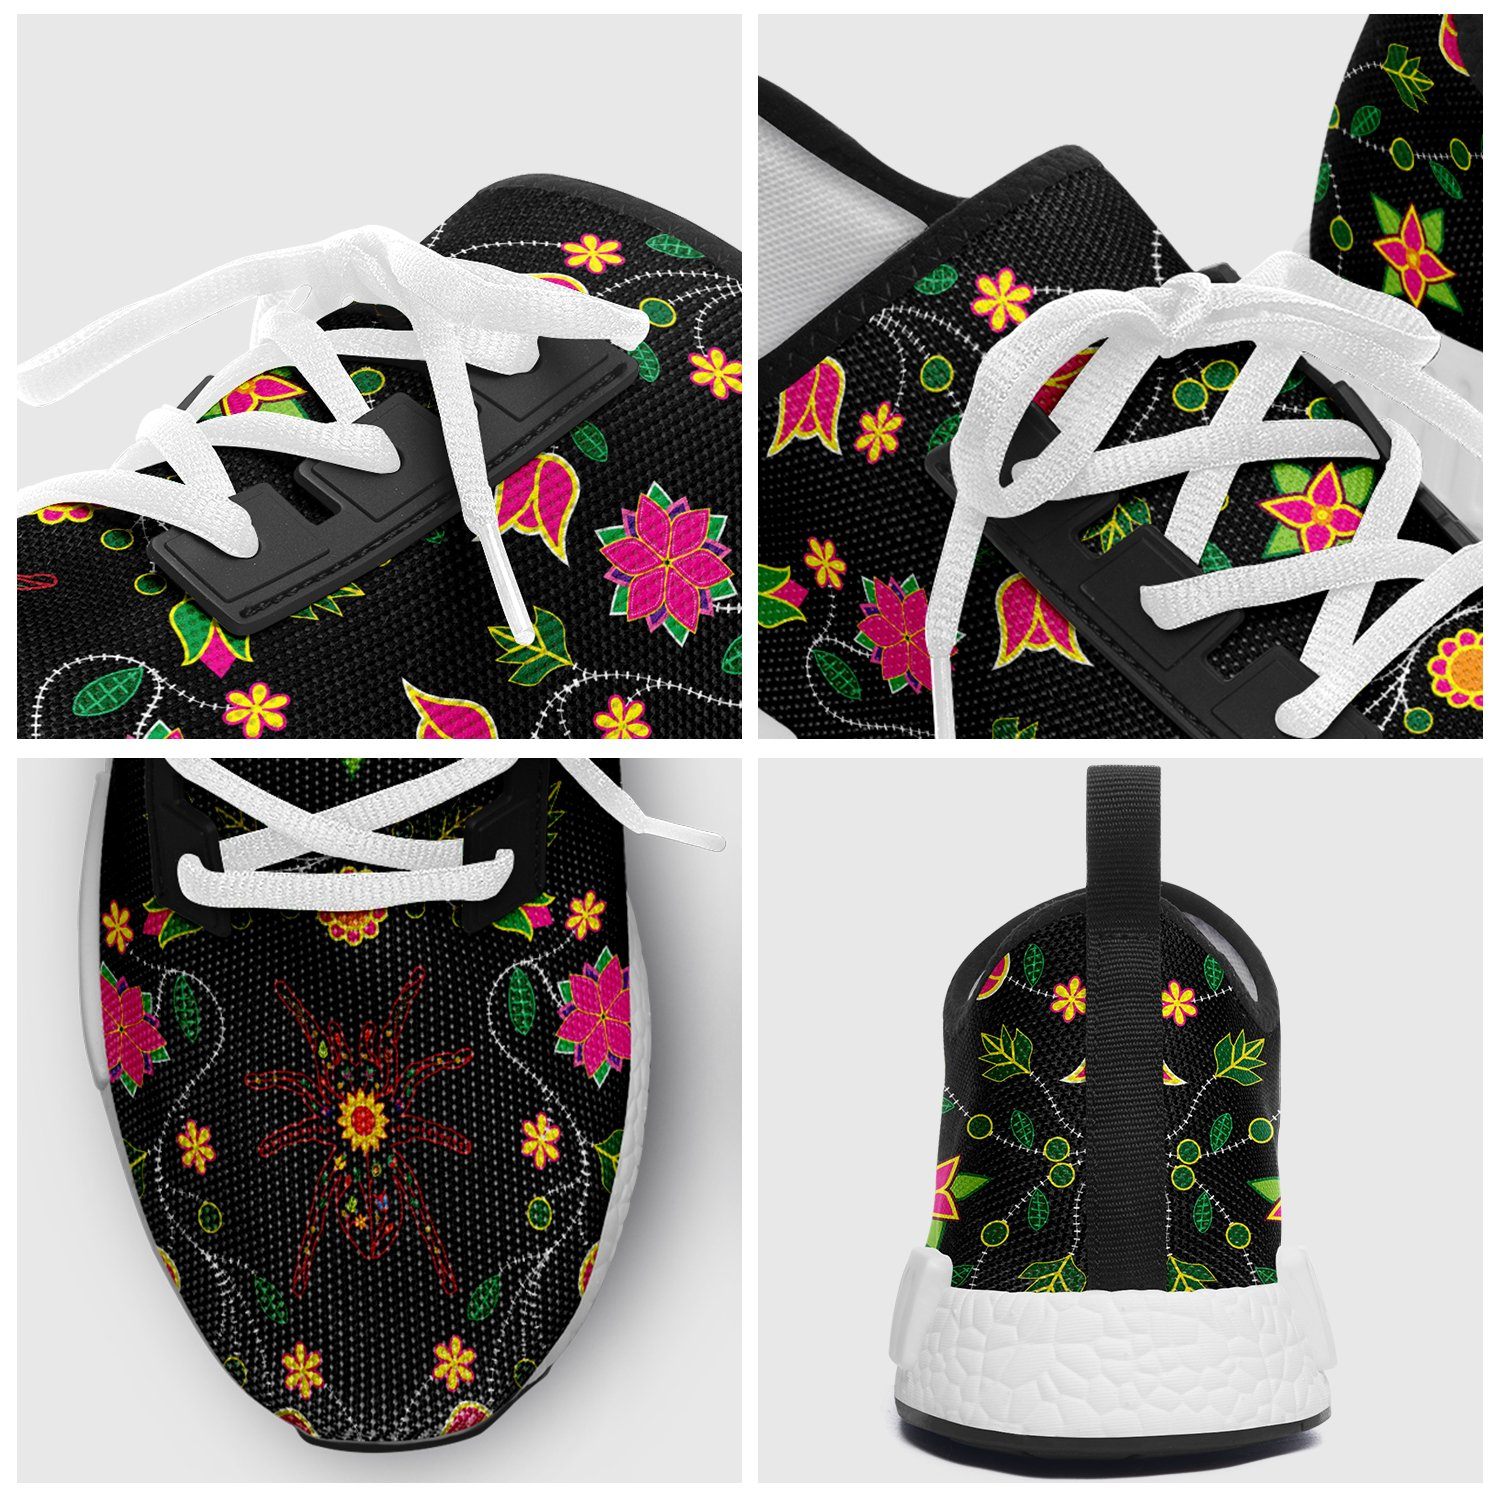 Floral Spider Draco Running Shoes 49 Dzine 